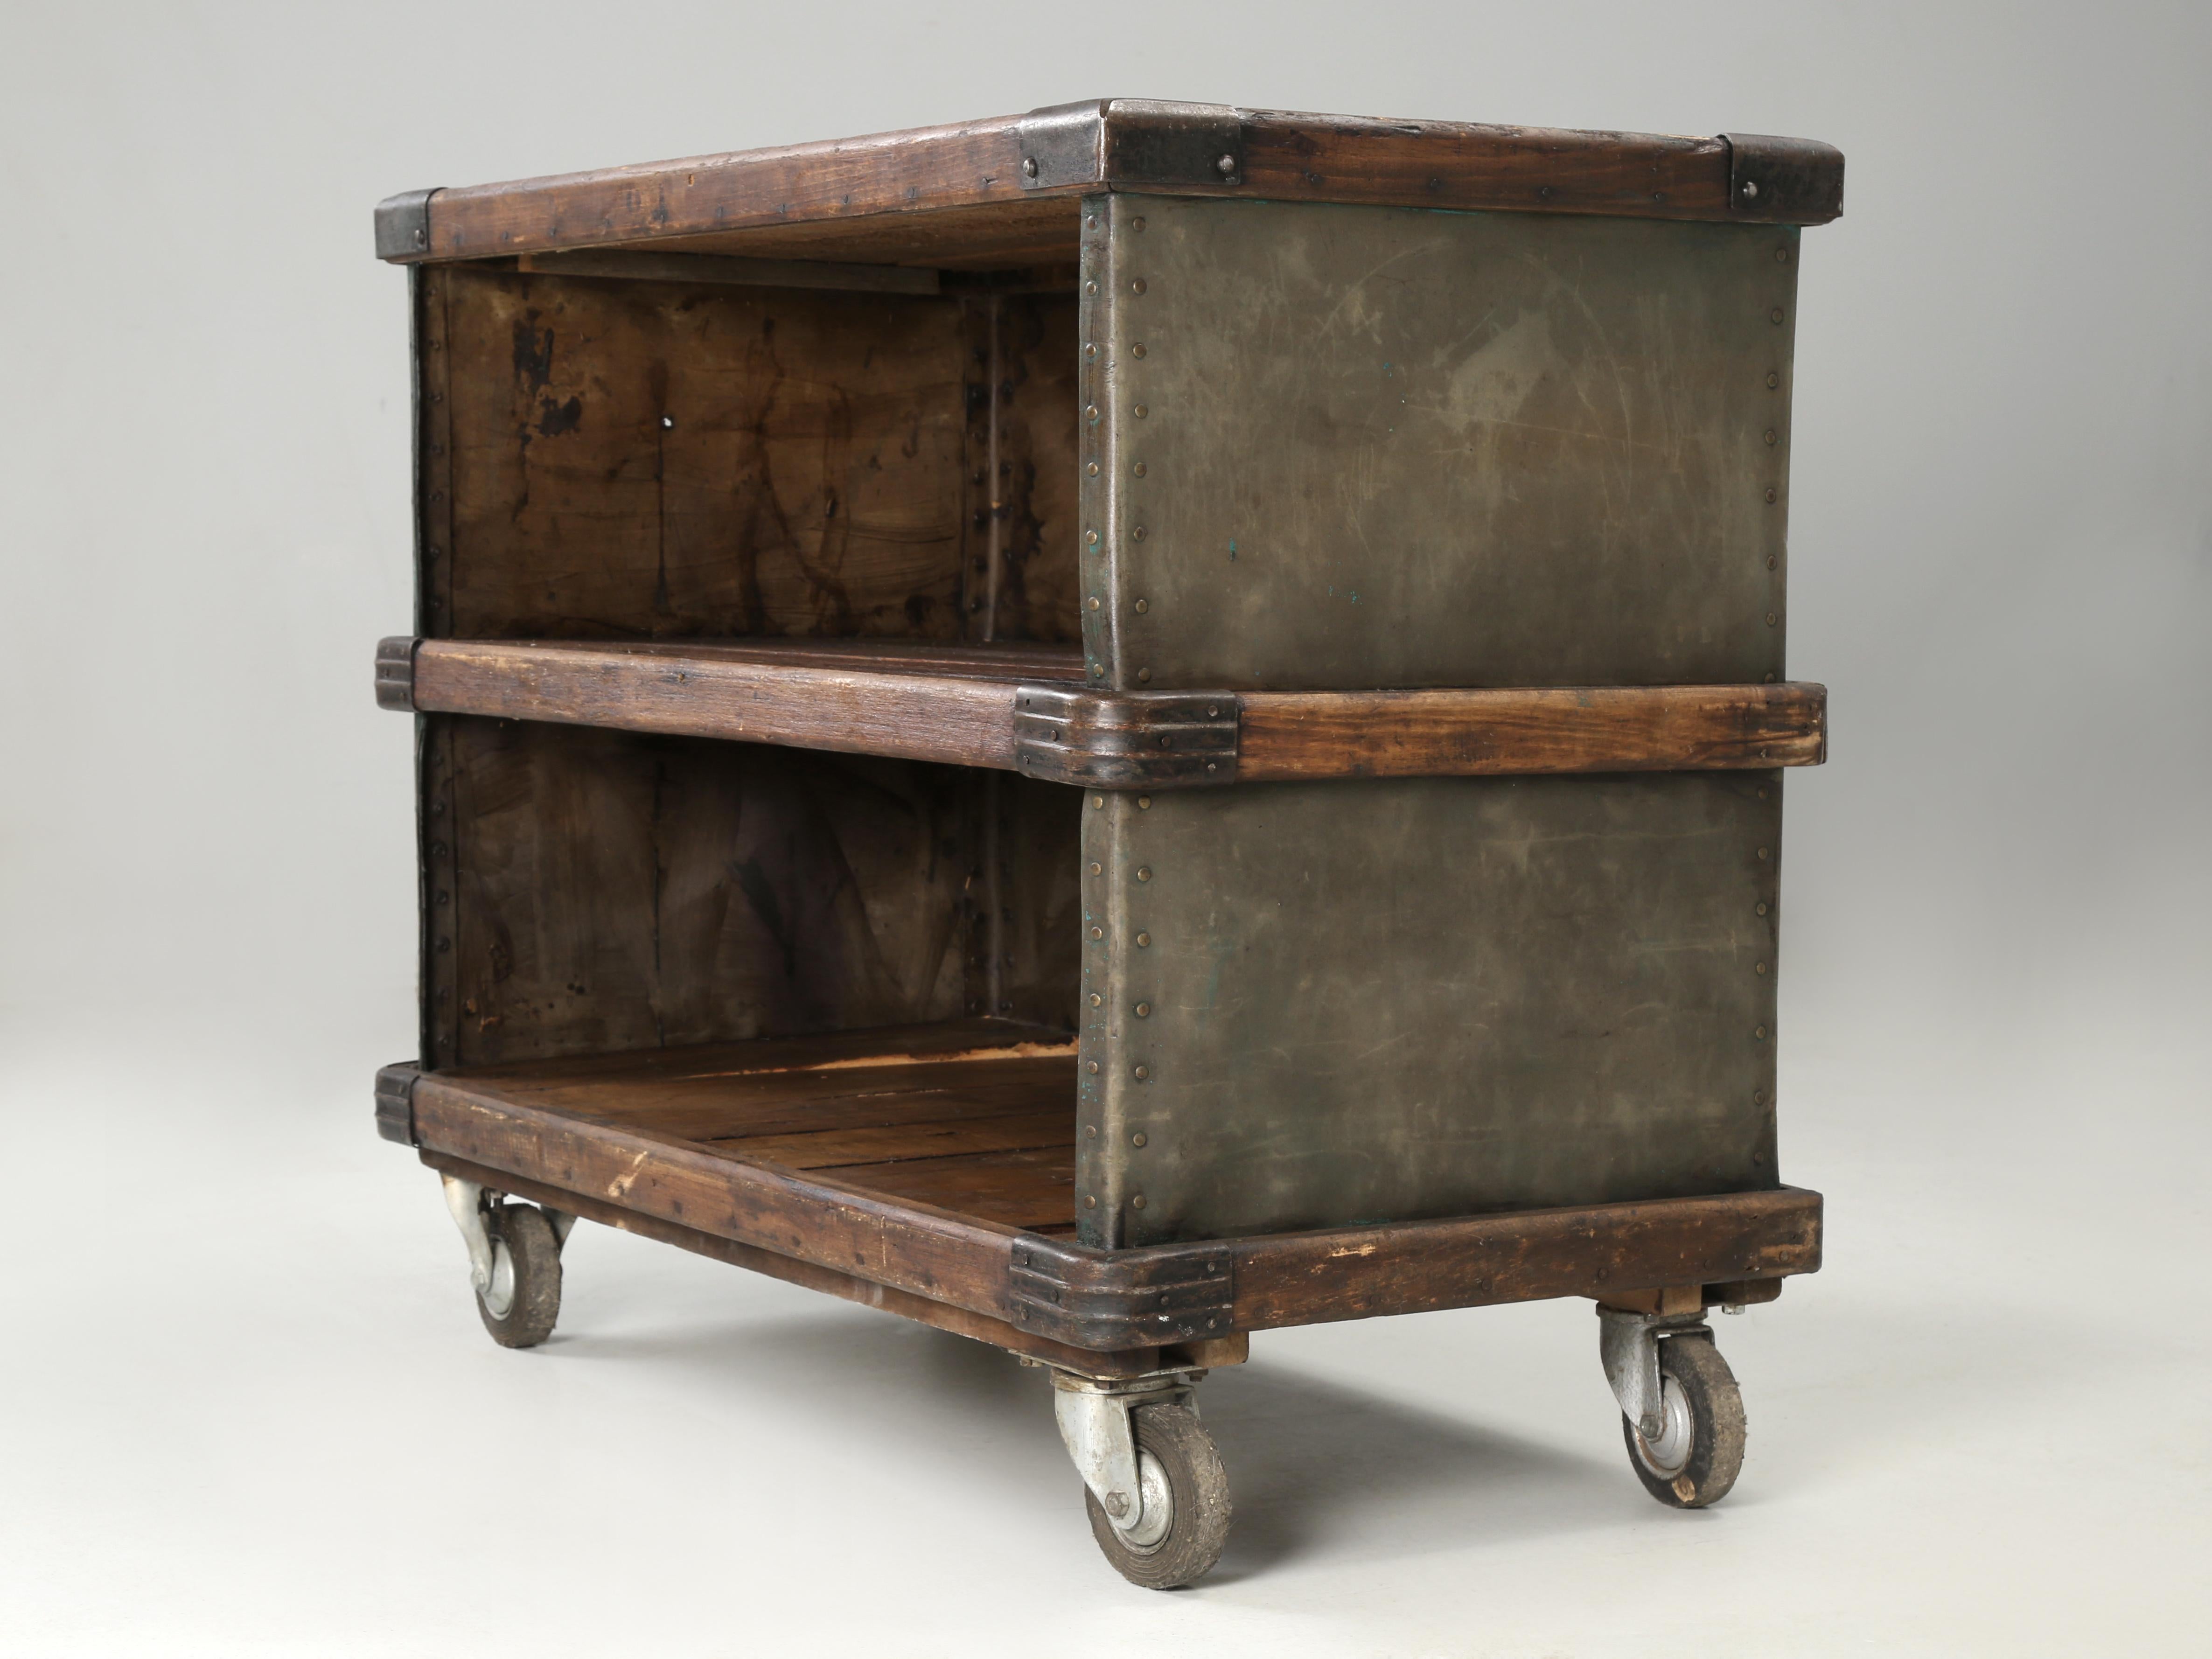 Hand-Crafted French Repurposed Mobile Suroy Storage Container into a Bar Cart or Office Cart For Sale